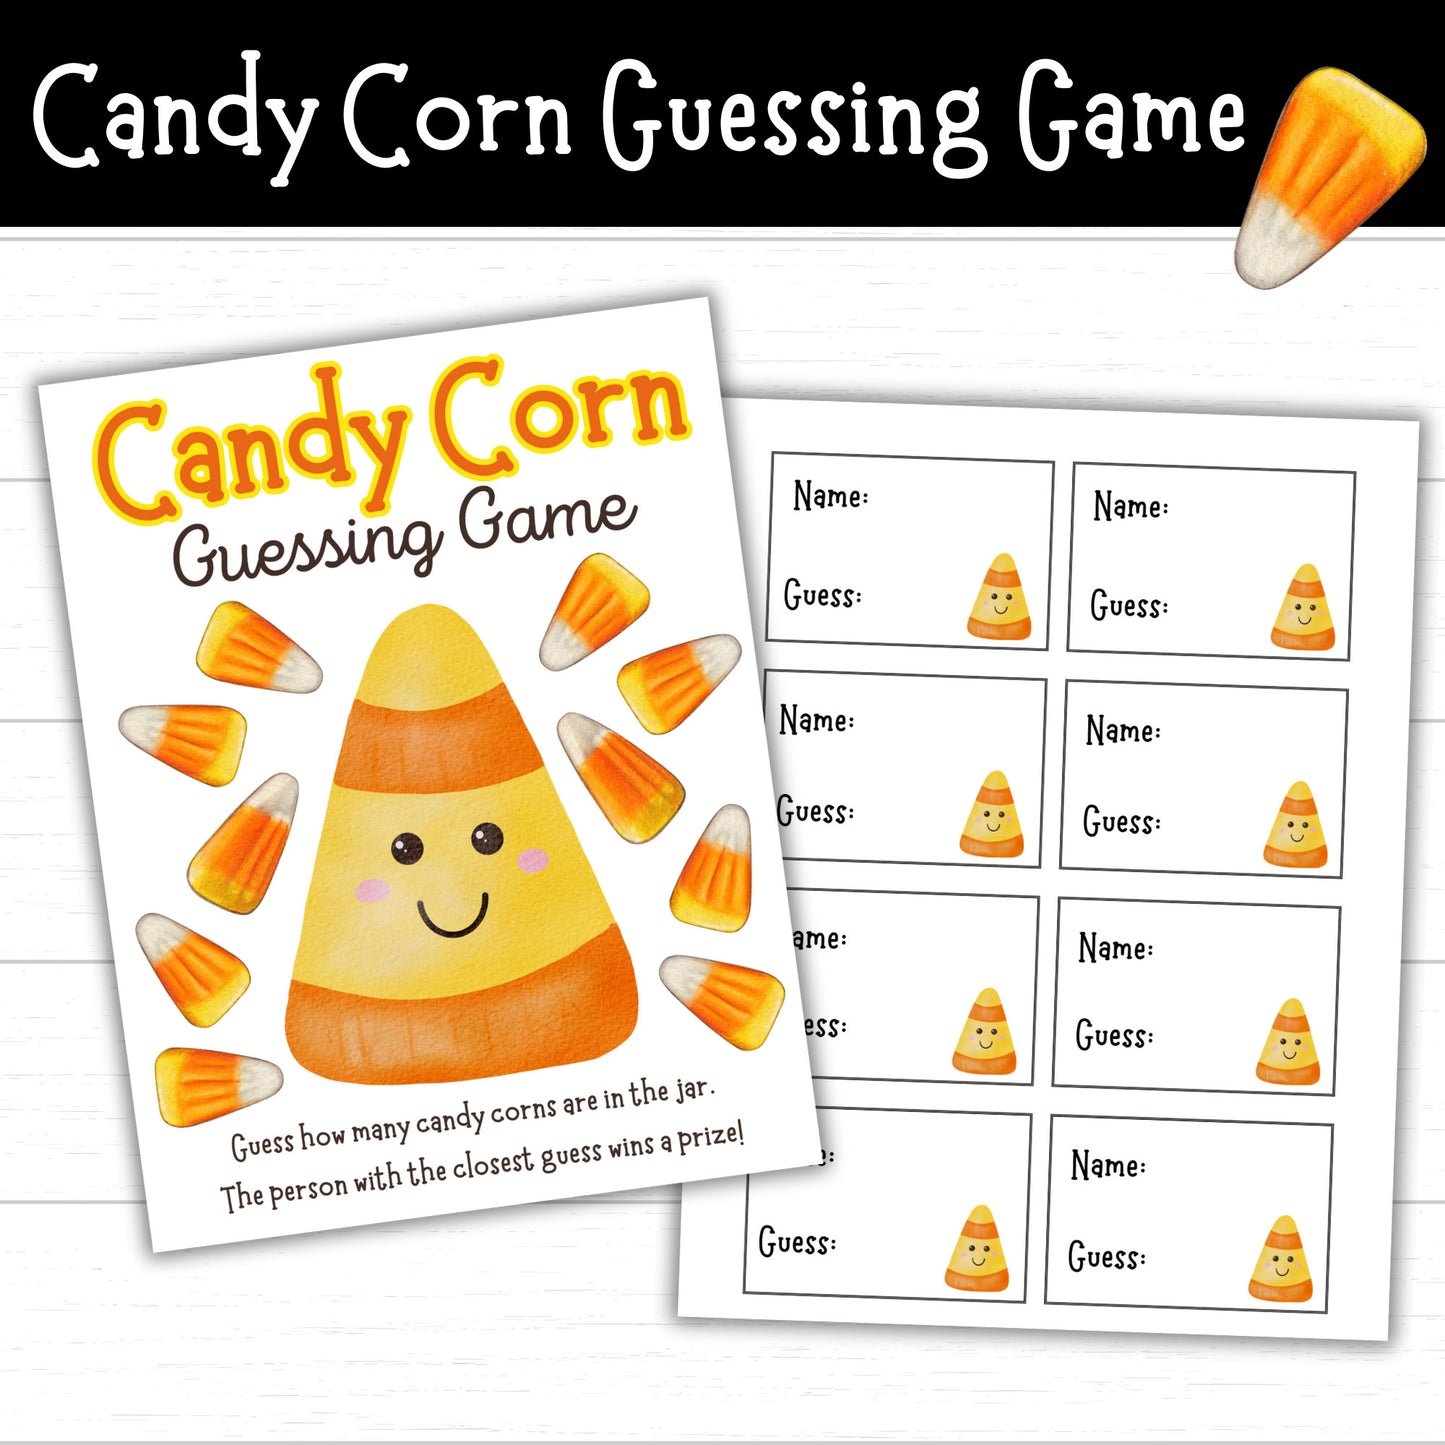 Candy Corn Guessing Game Printable, Halloween Guess How Many Game, How Many Candies are in the Jar, Candy Corn Jar Game, Halloween Games,